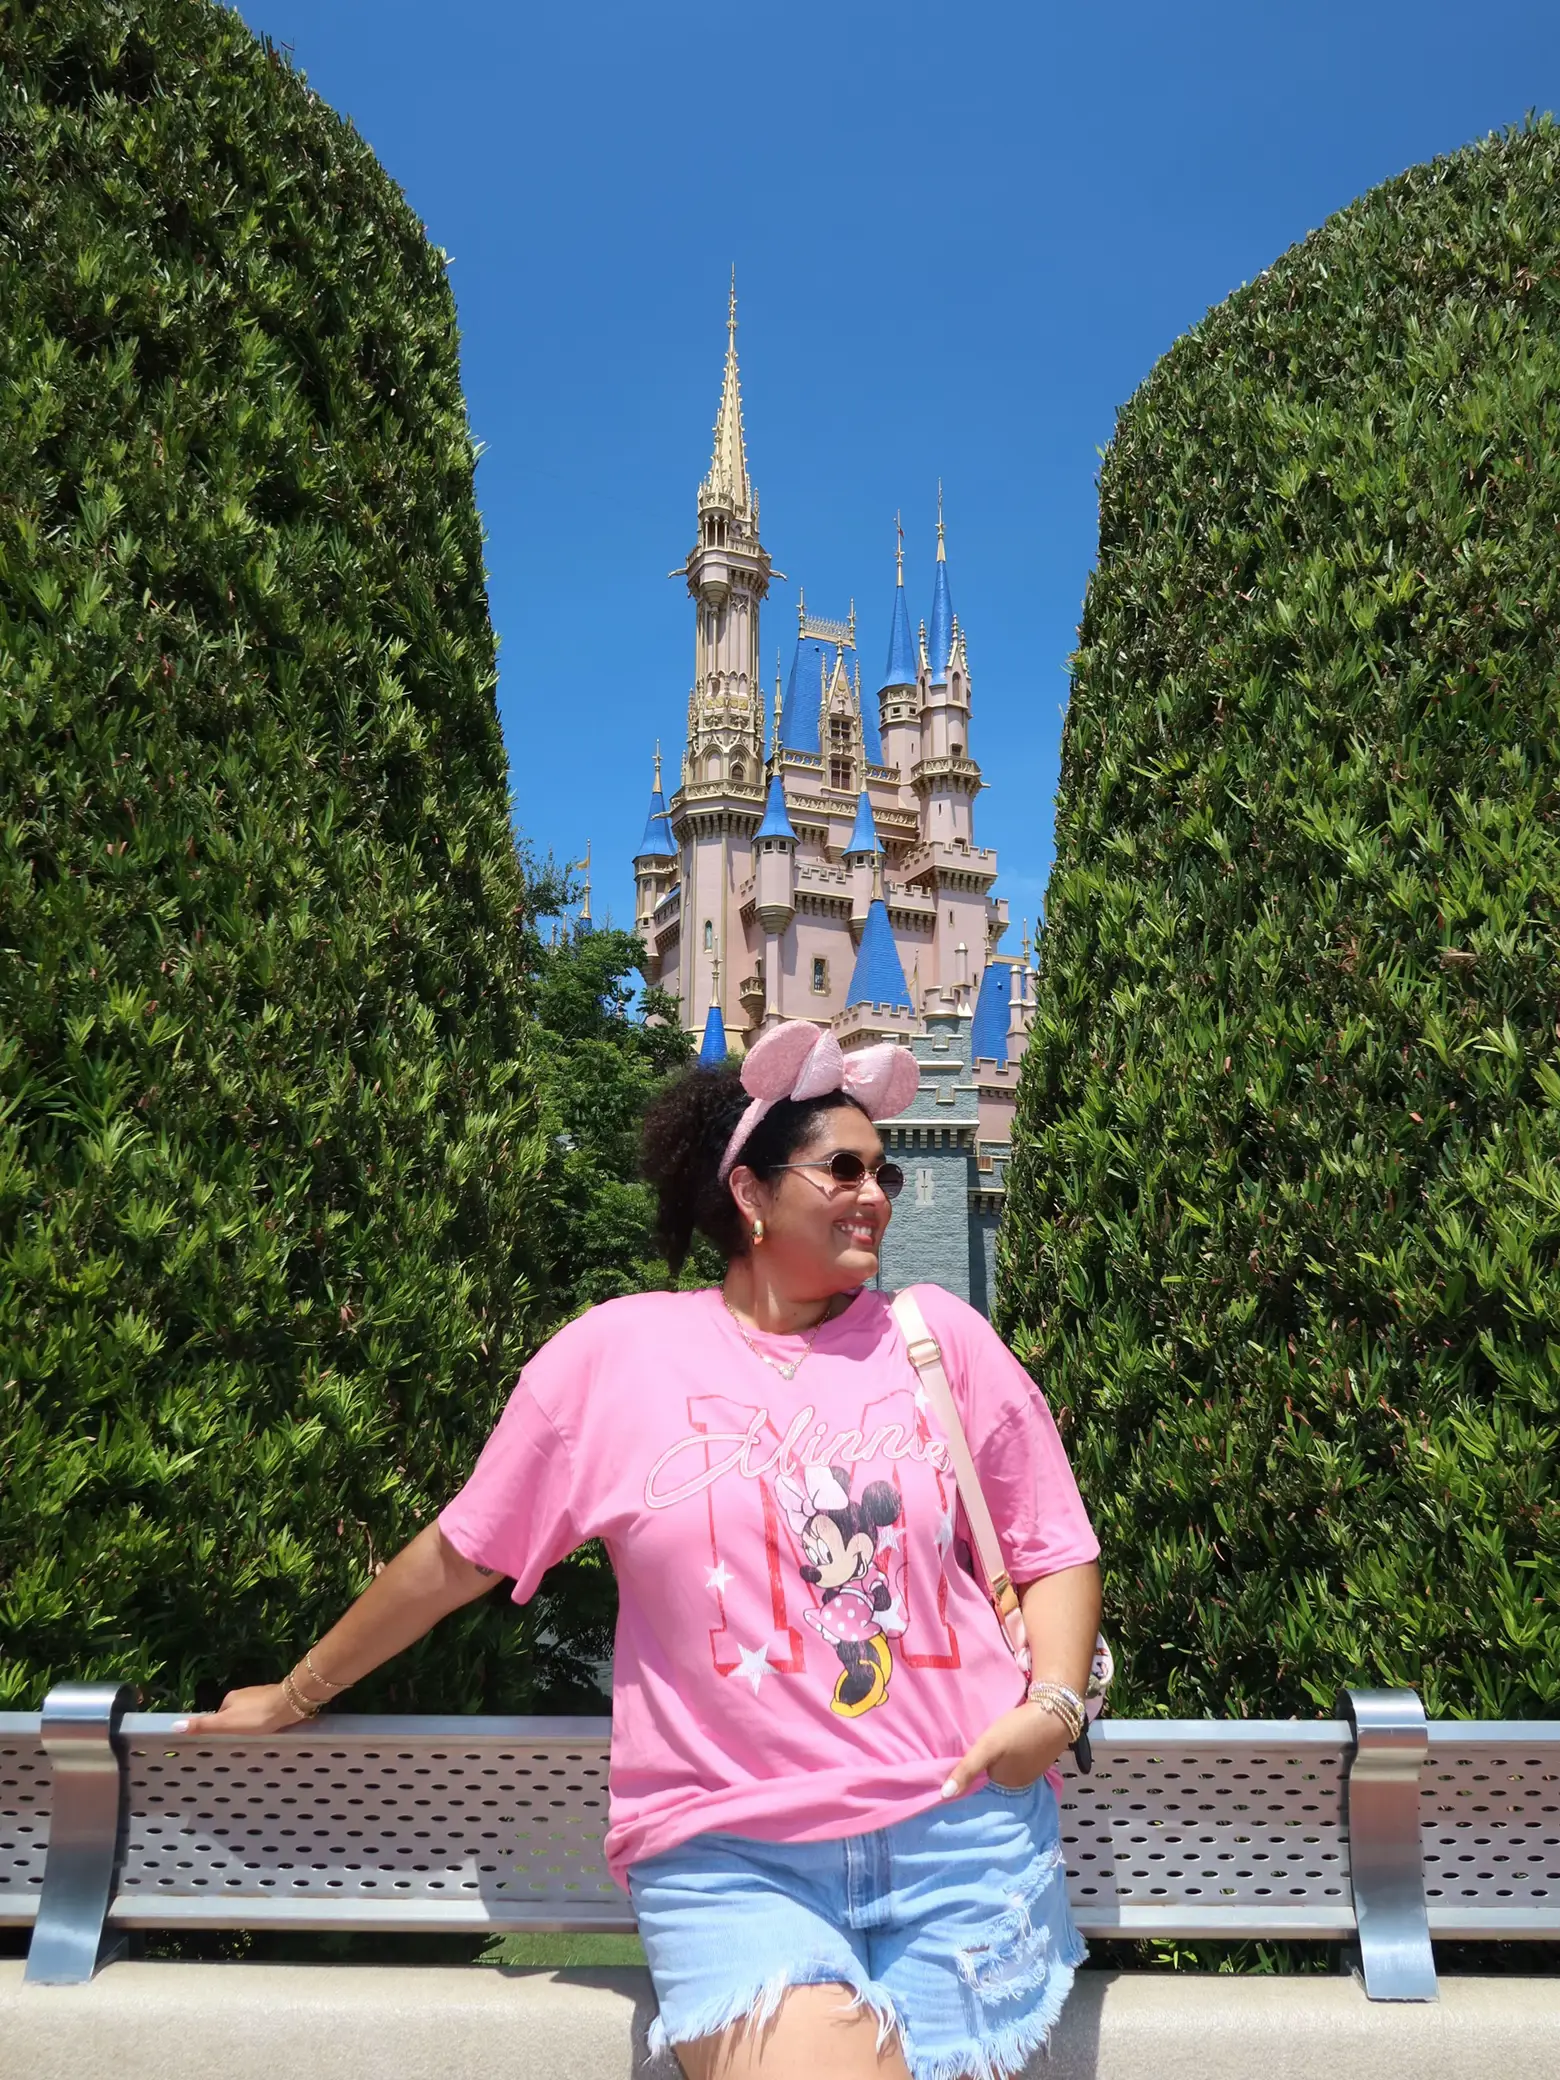  A woman wearing a pink shirt and a hat is sitting on a bench in front of a castle. She is smiling and holding a purse.